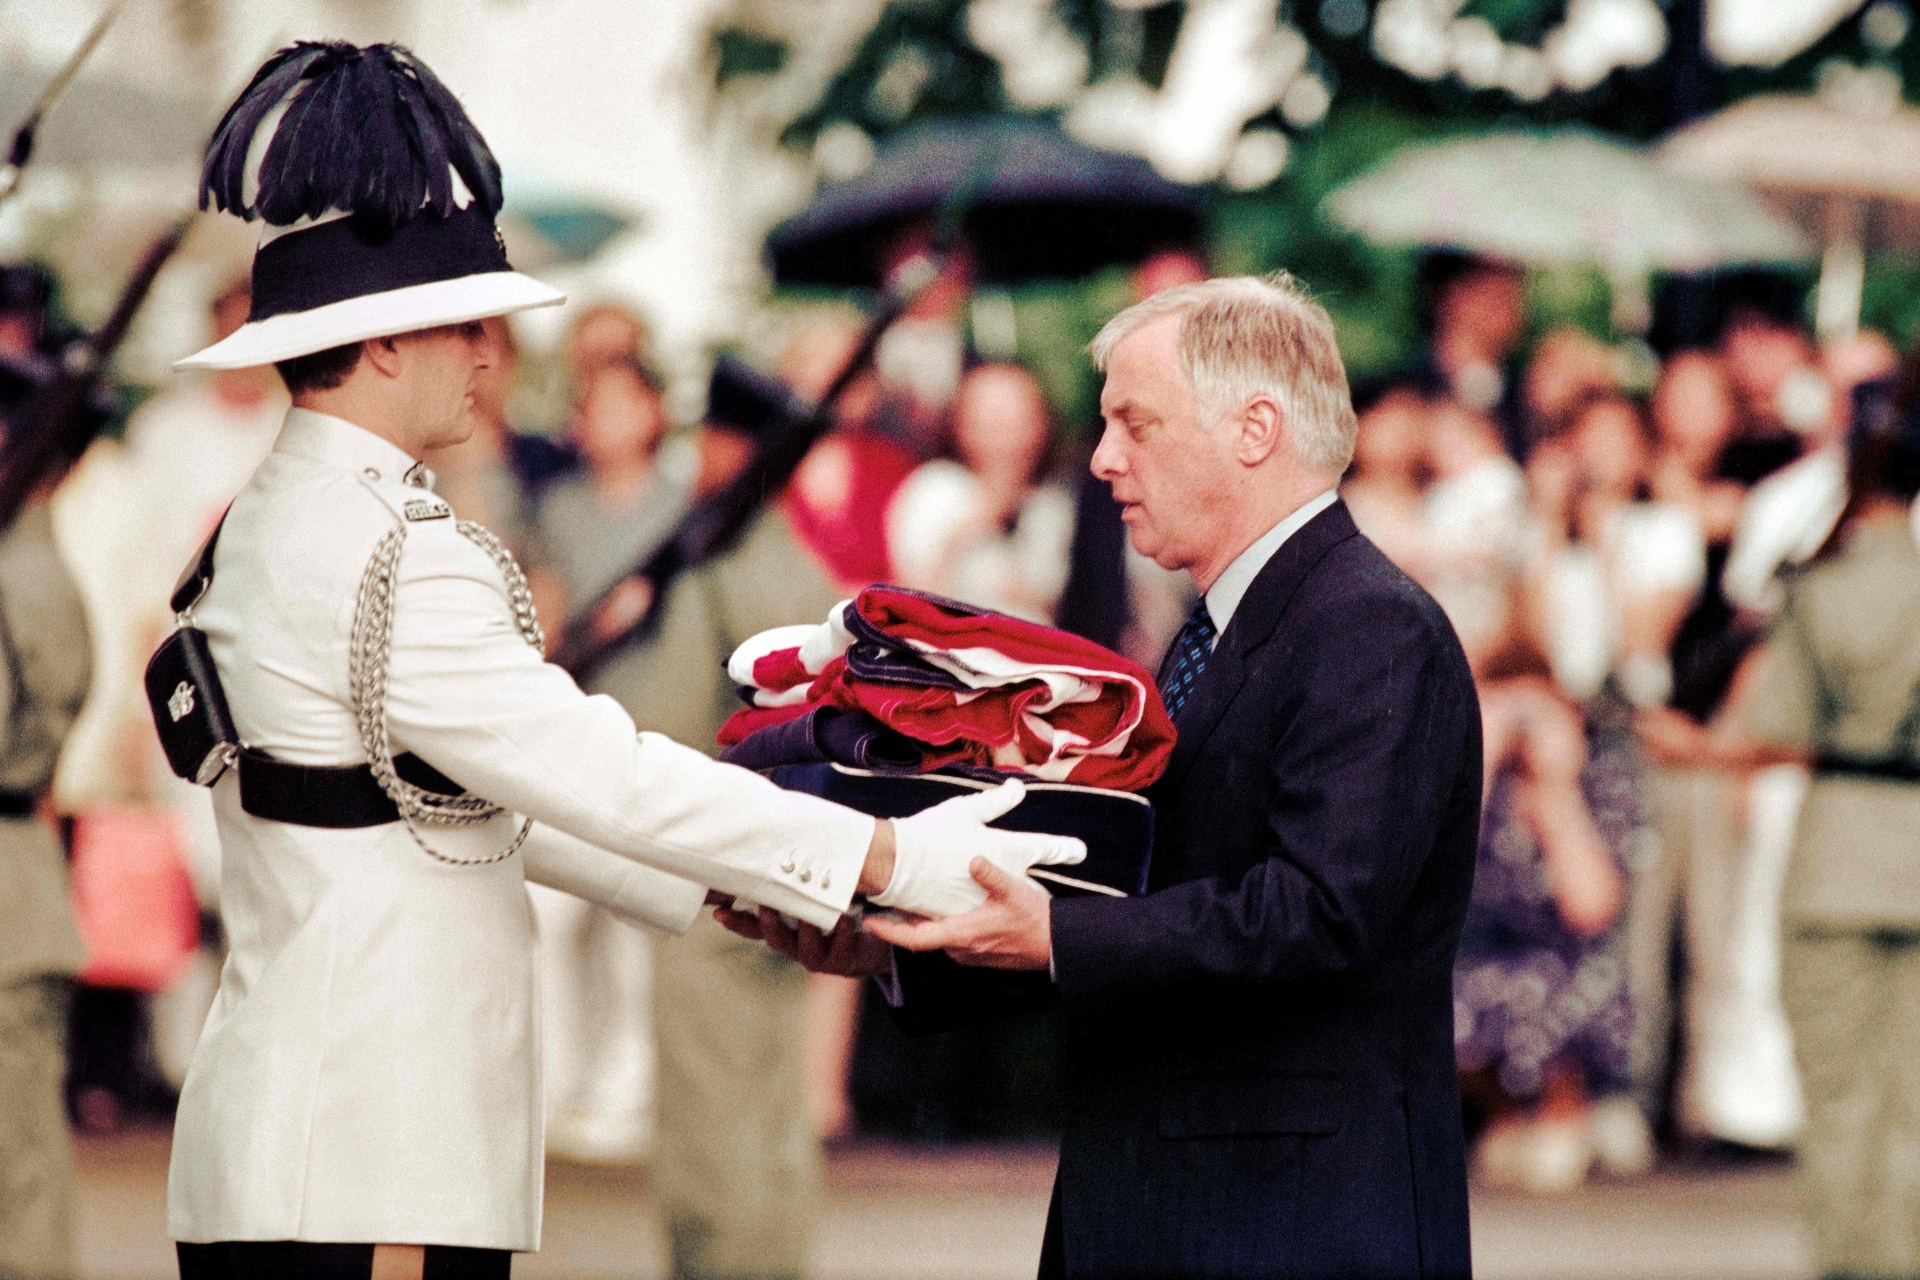 Chris Patten (R), the 28th and last governor of colonial Hong Kong, receives the Union Jack flag after it was lowered for the last time at Government House - the governor's official residence - during a farewell ceremony in Hong Kong on June 30, 1997, just hours prior to the territory's handover from British to Chinese rule. (Photo by EMMANUEL DUNAND / AFP) (Photo by EMMANUEL DUNAND/AFP via Getty Images)